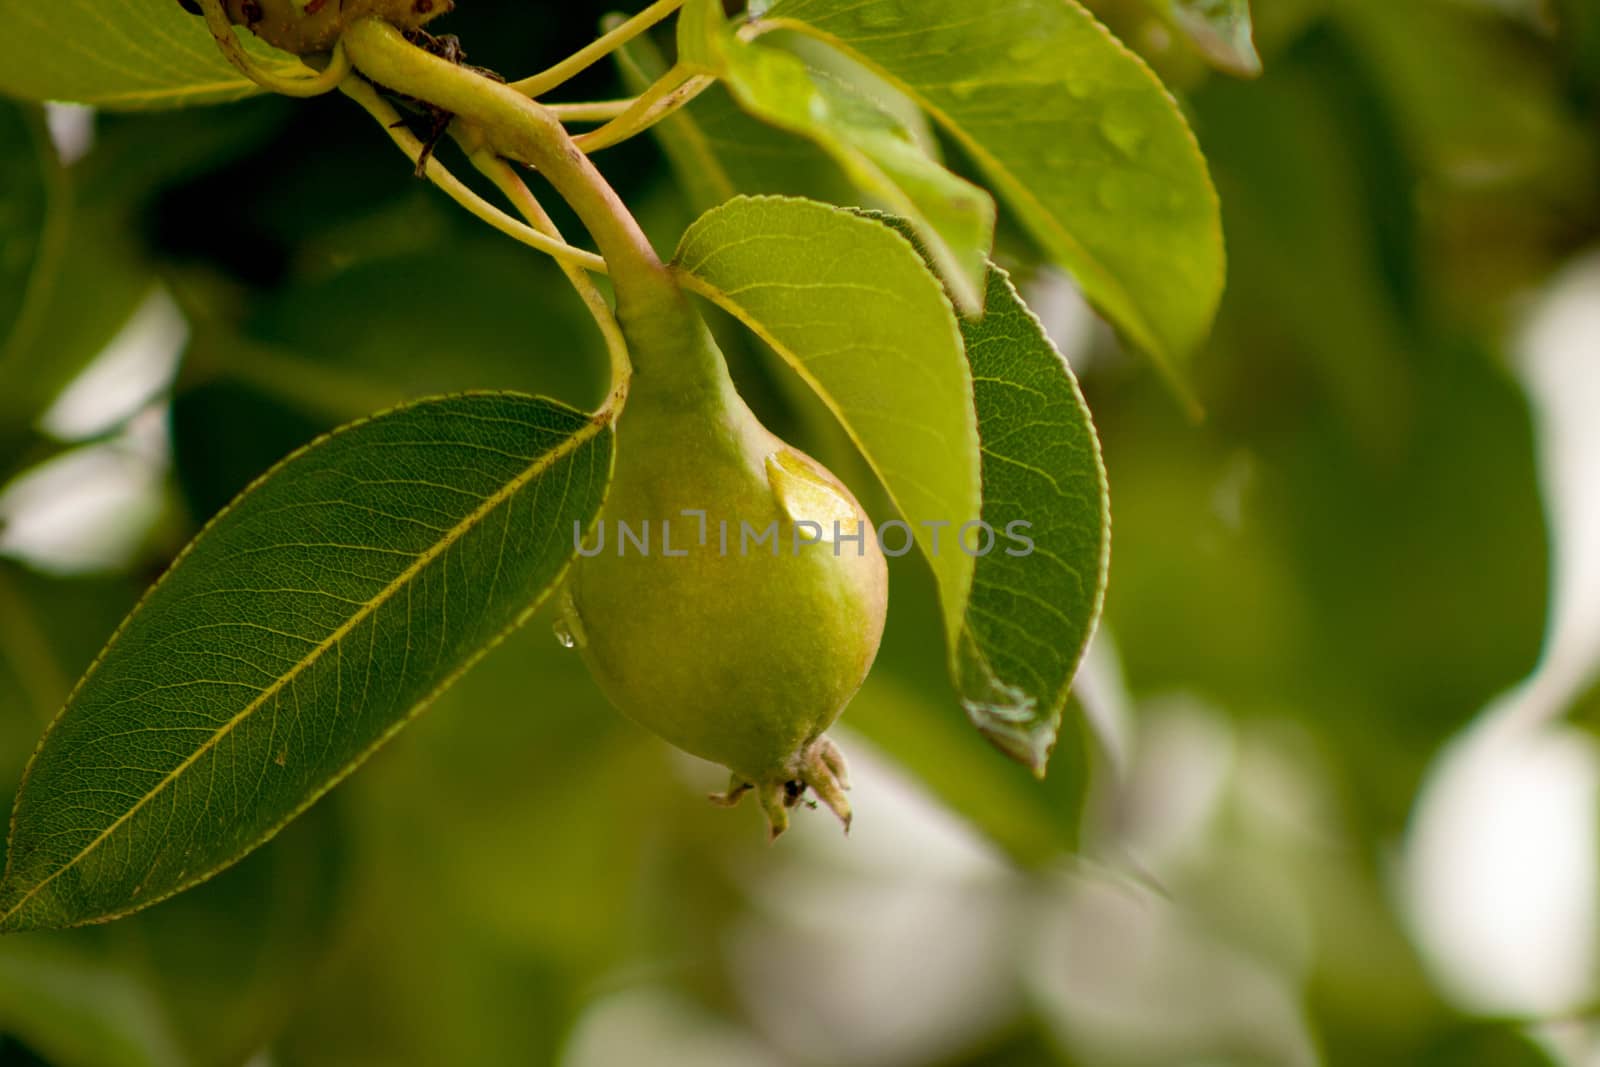 Green pear hanging on a branch with leafs focus on a single one in the middle.